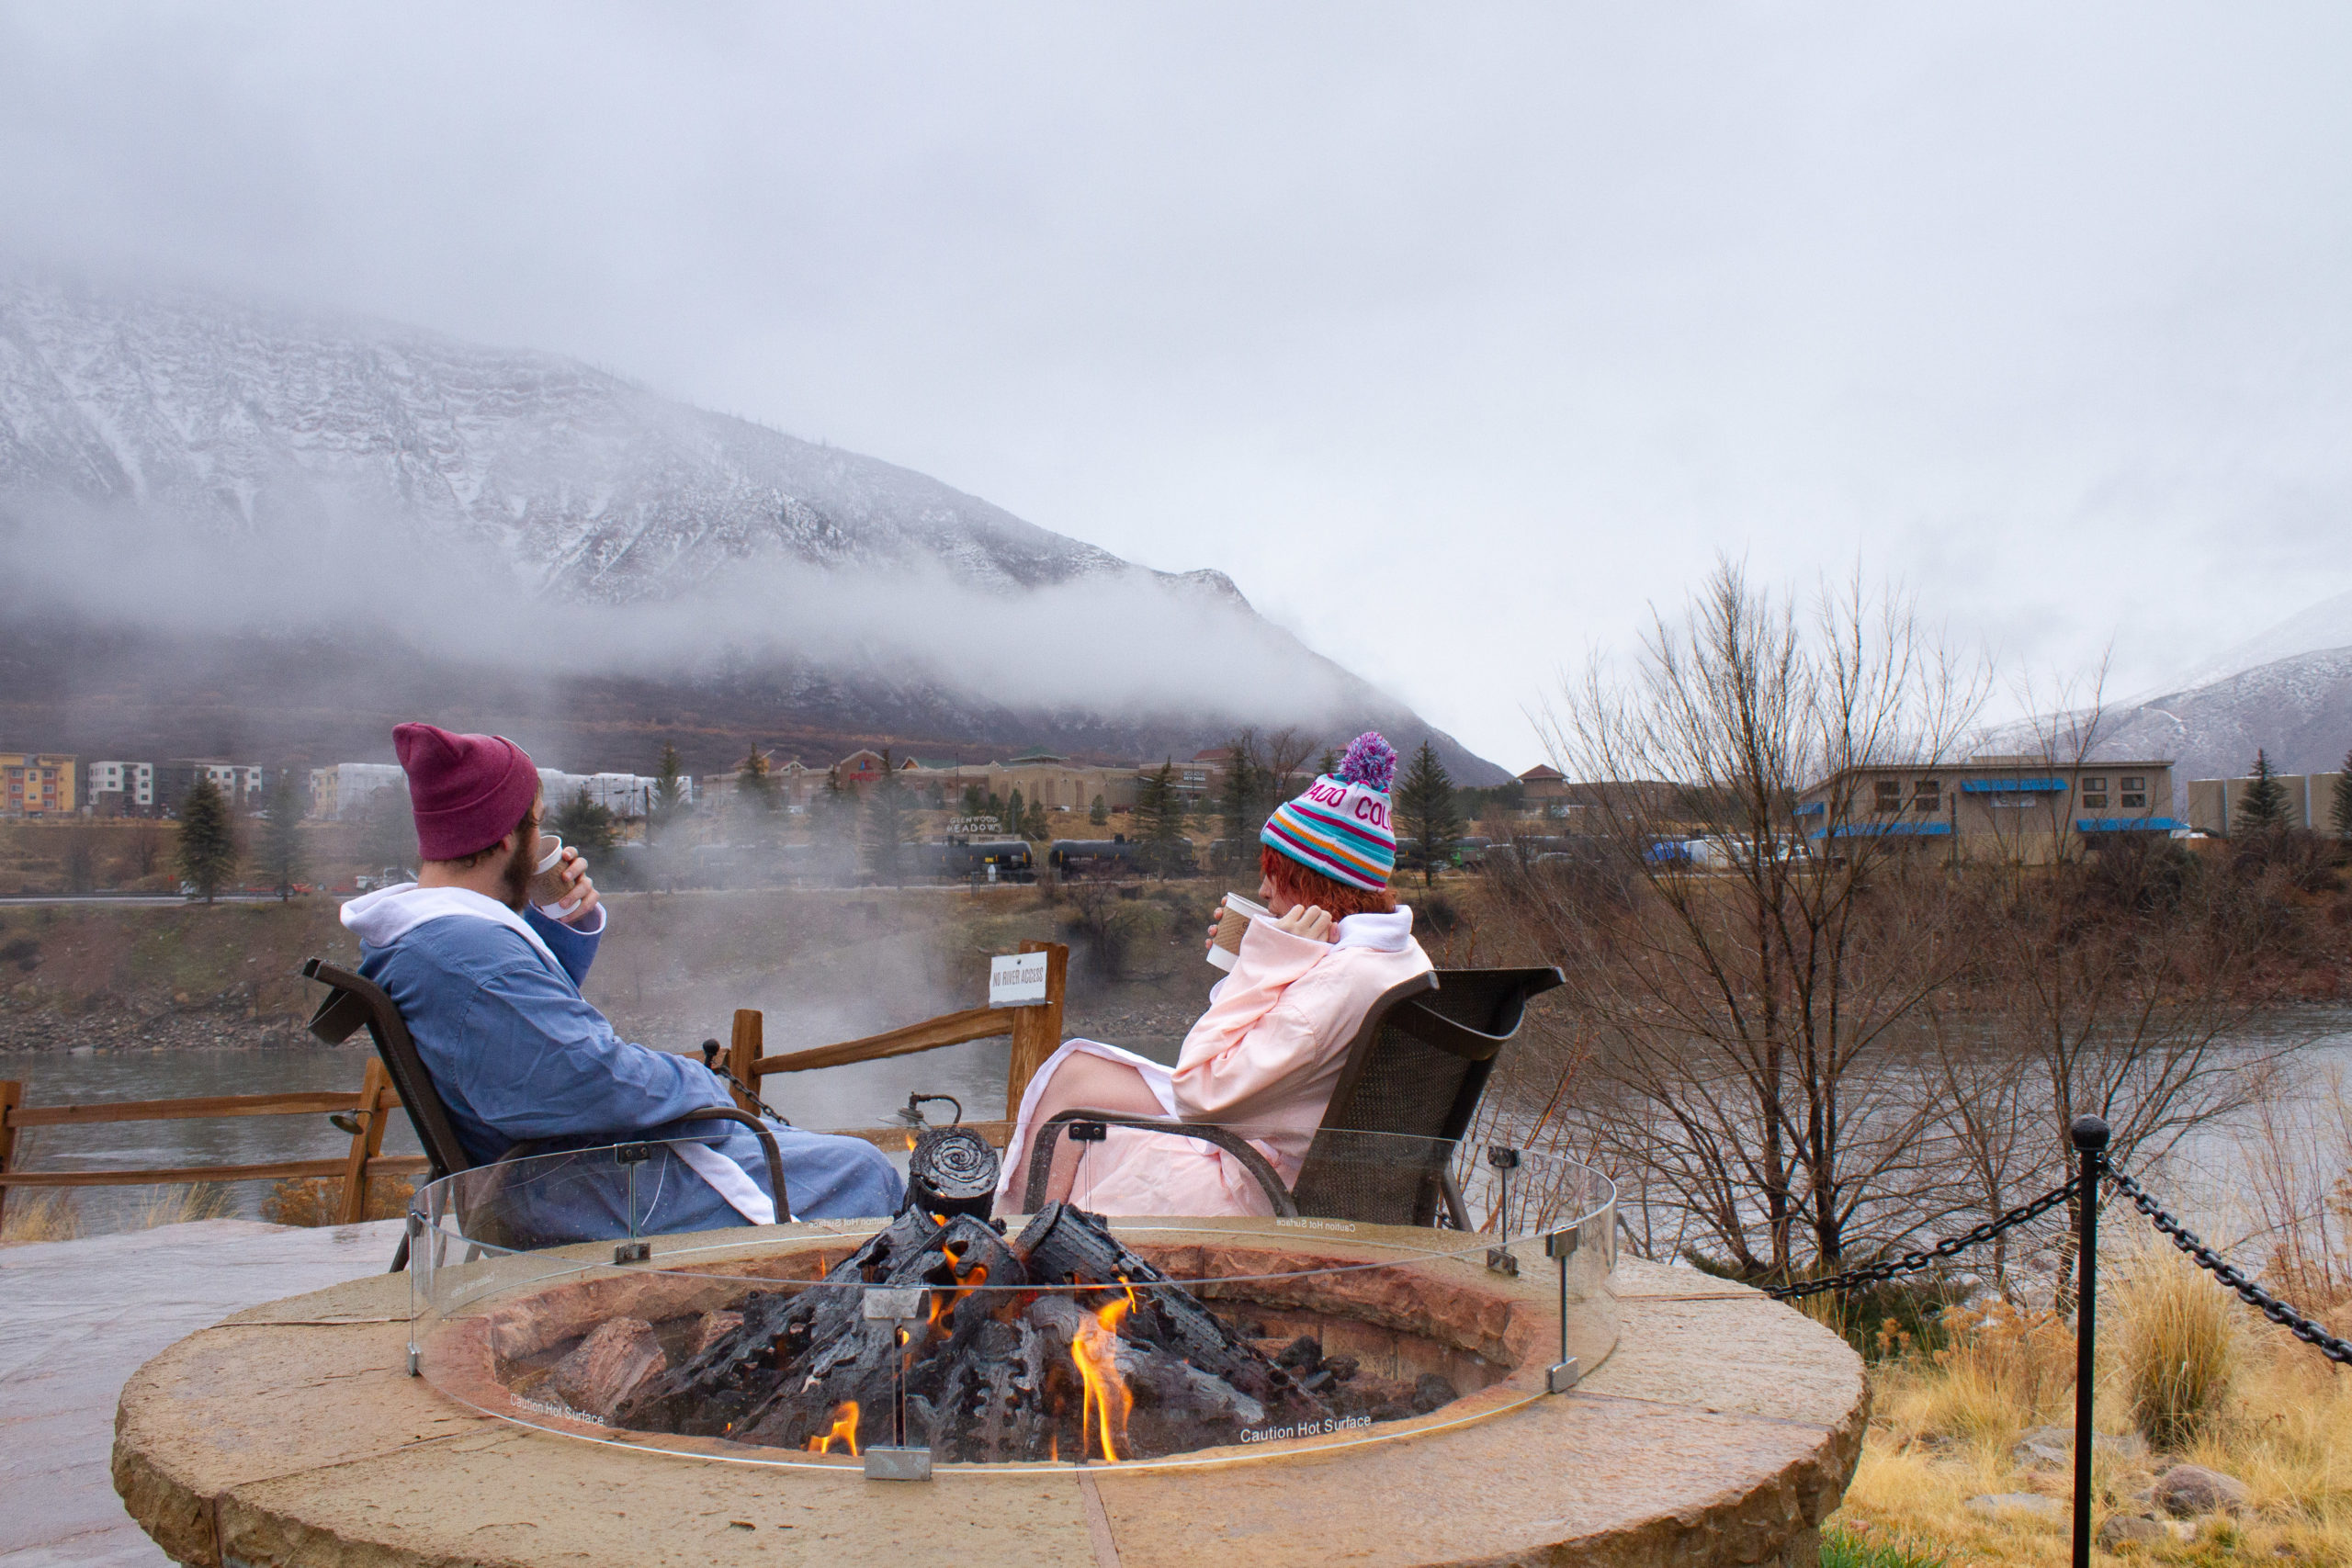 Warm up this winter at Iron Mountain Hot Springs